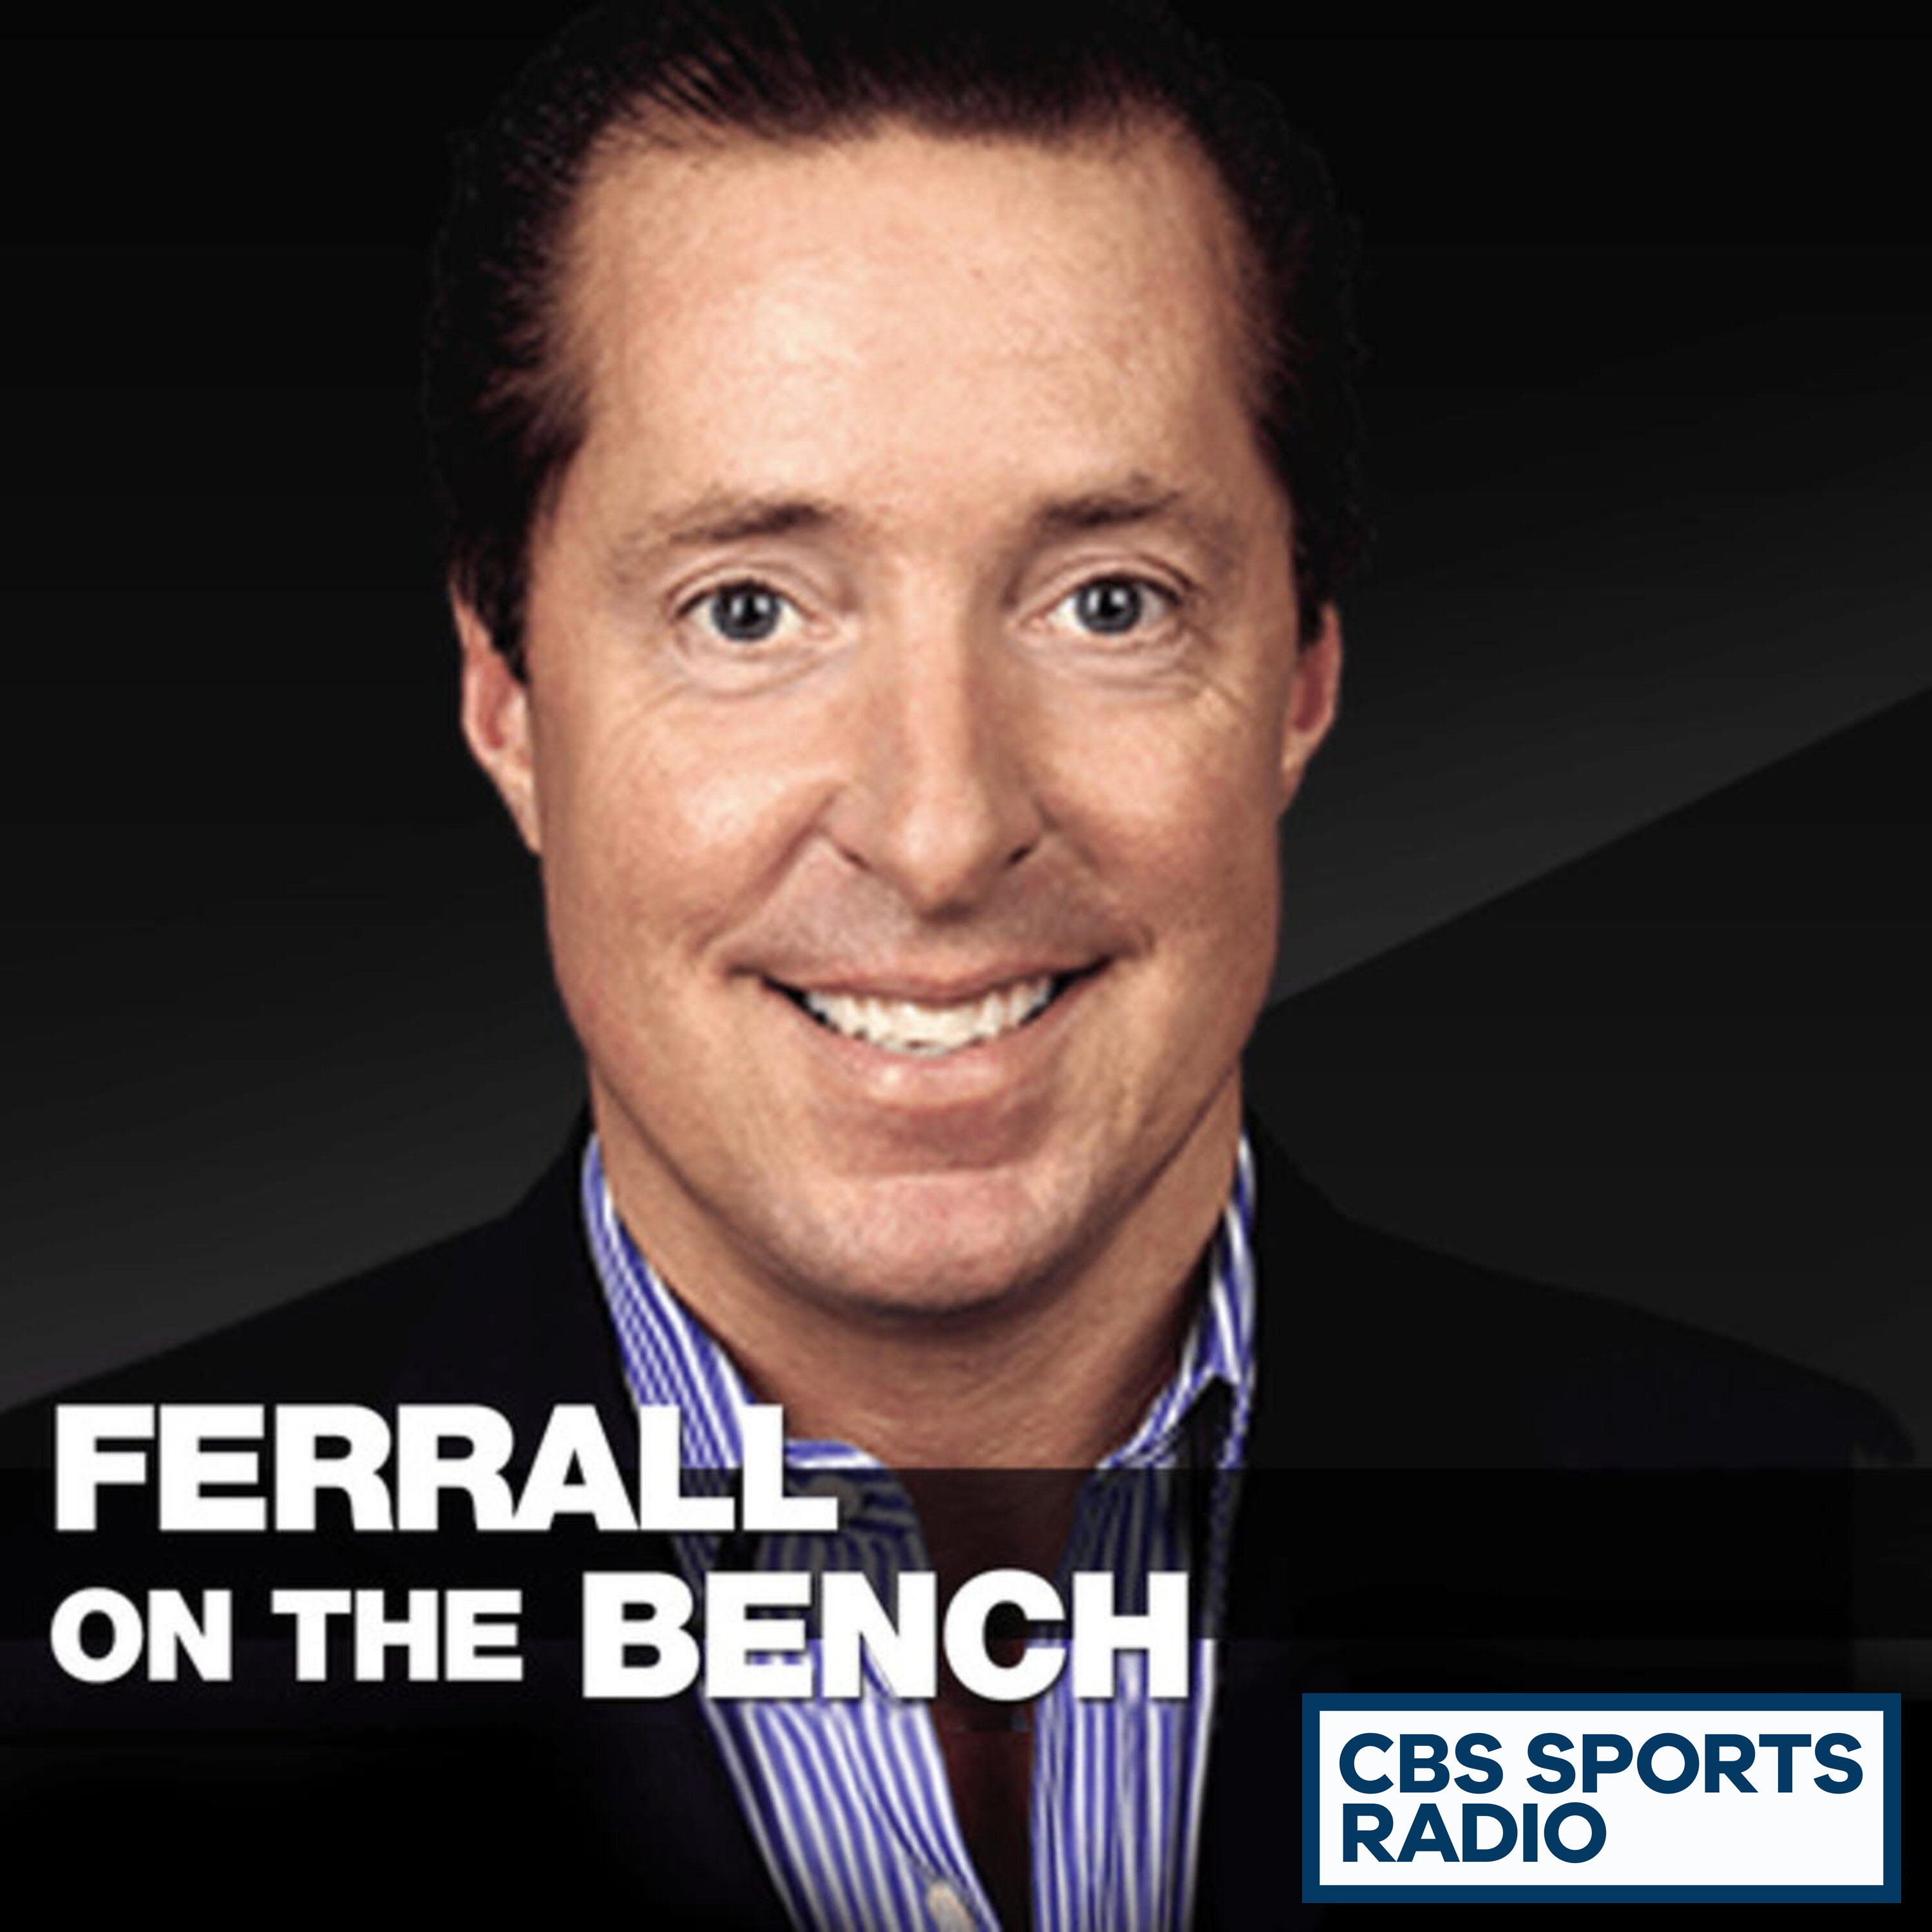 01-01-20 - Ferrall On The Bench - Ferrall on AFC Playoffs